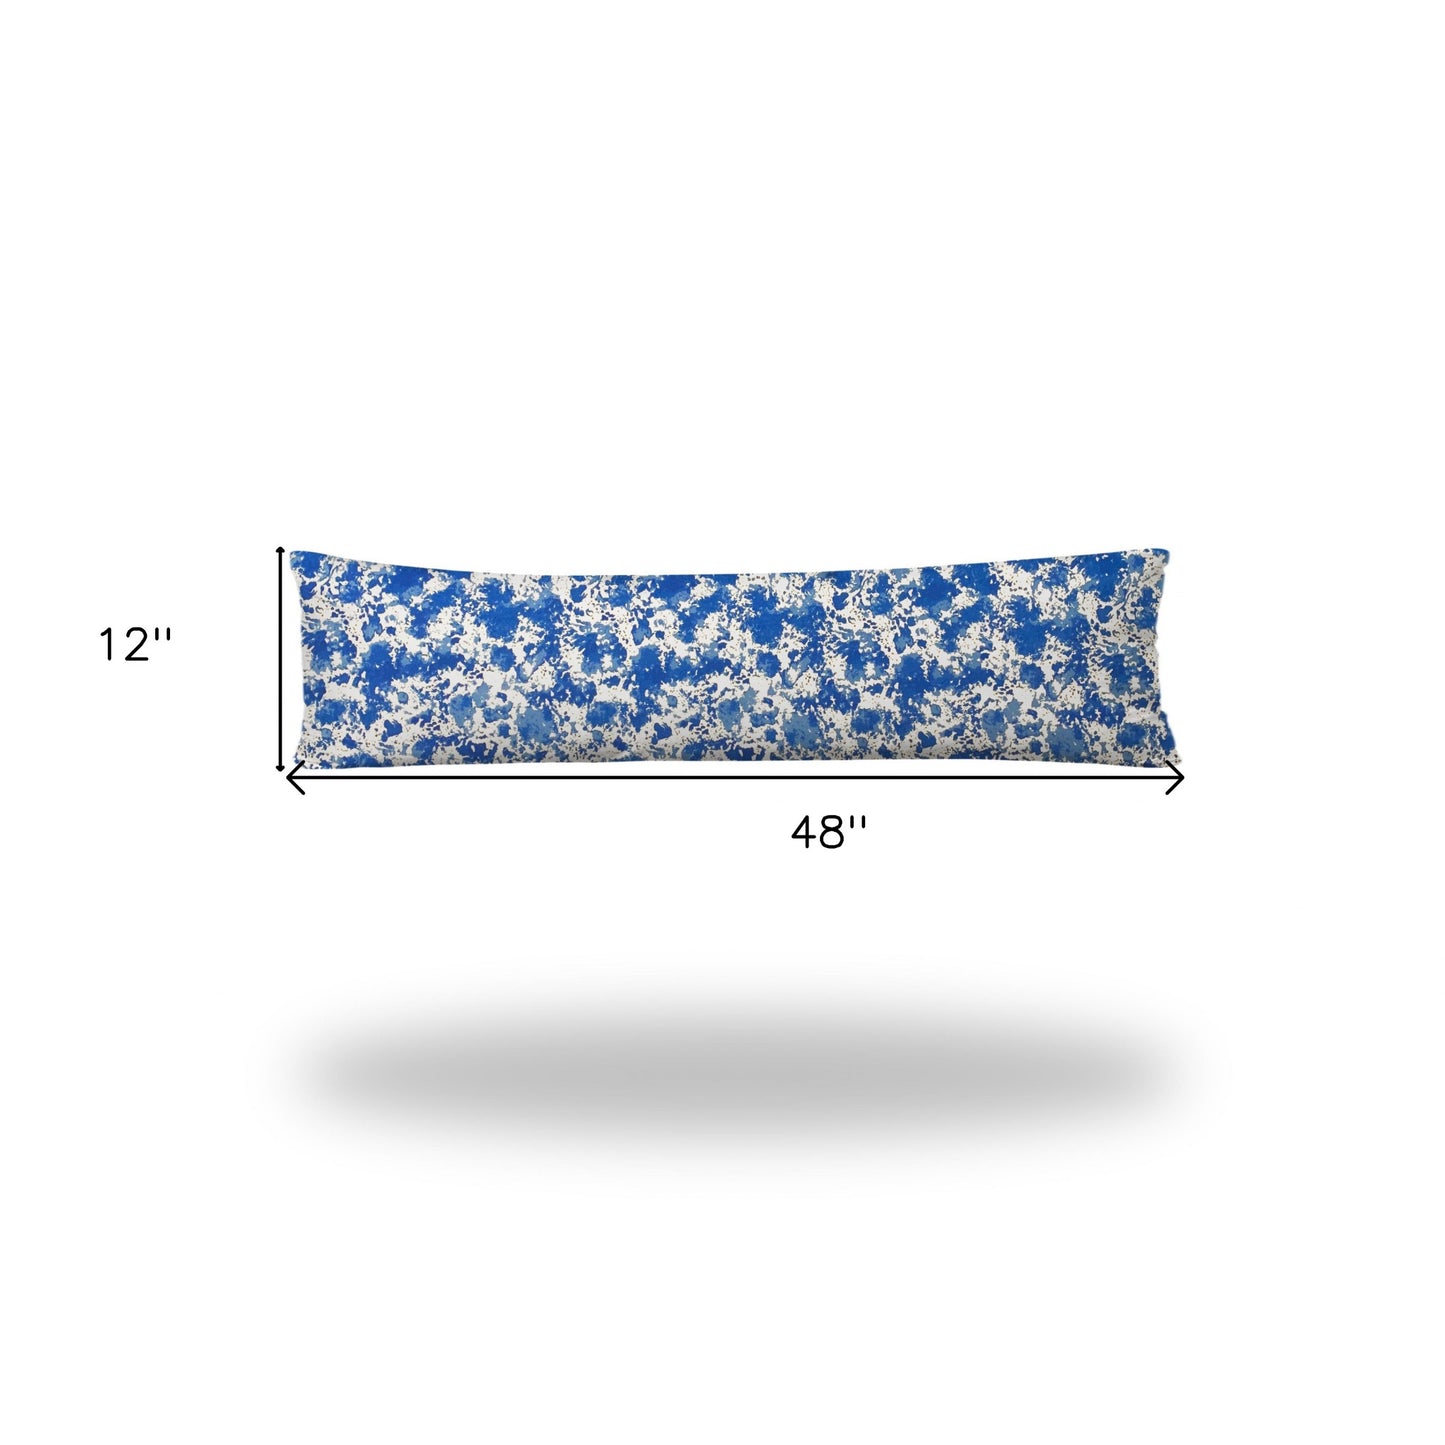 12" X 48" Blue And White Enveloped Lumbar Indoor Outdoor Pillow Cover